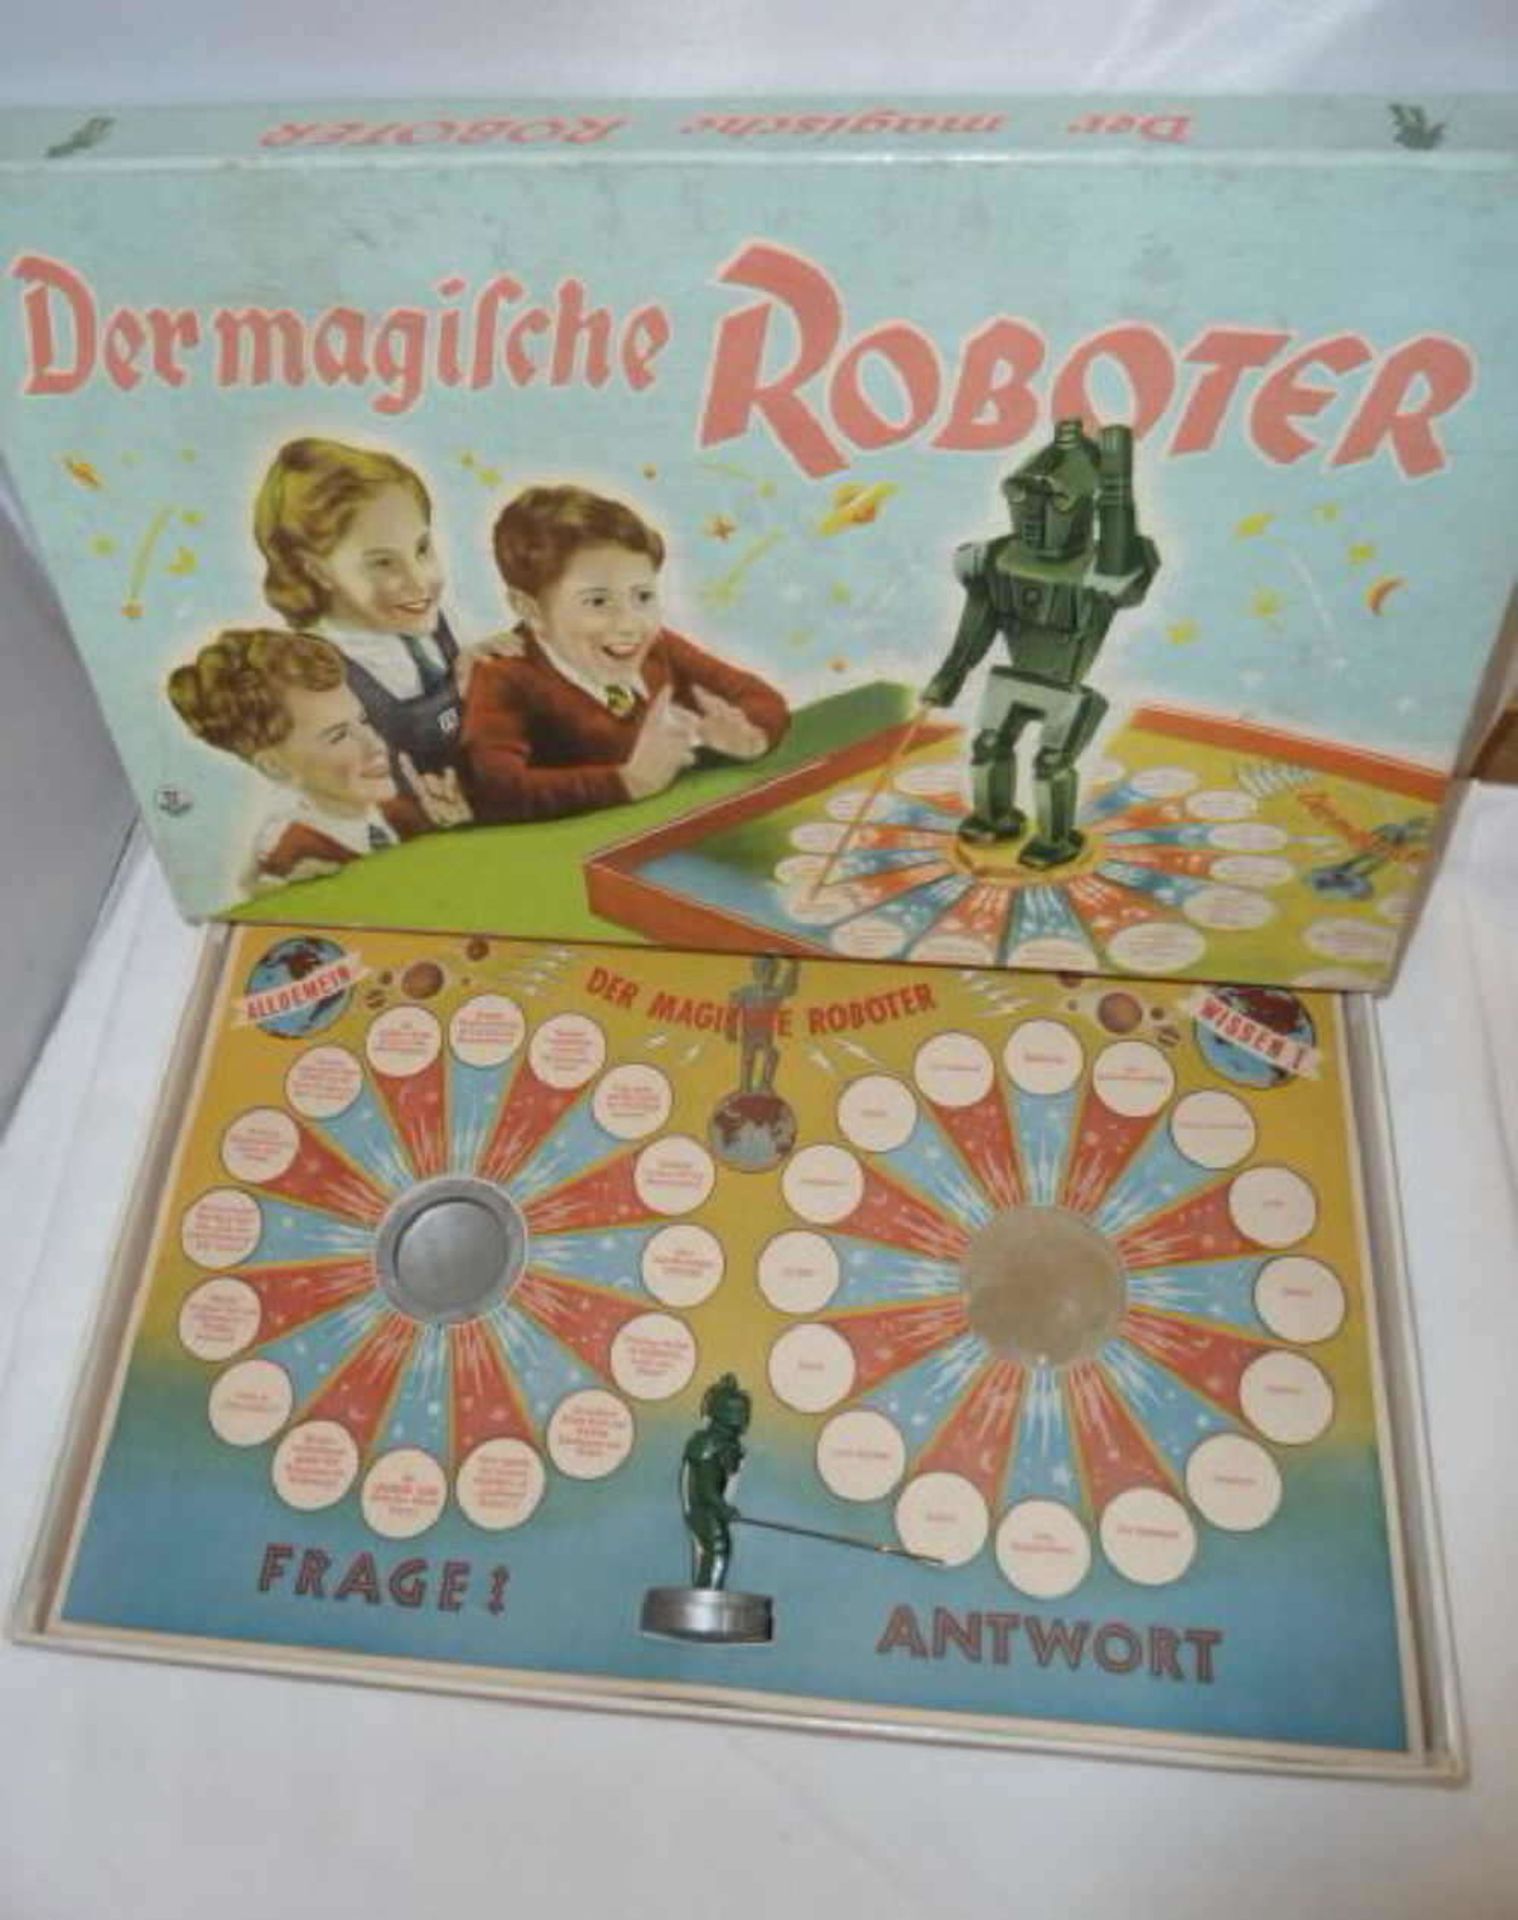 The Magic Robot, Question and Answer Game, 1960s. Very good condition, probably complete with 8 play